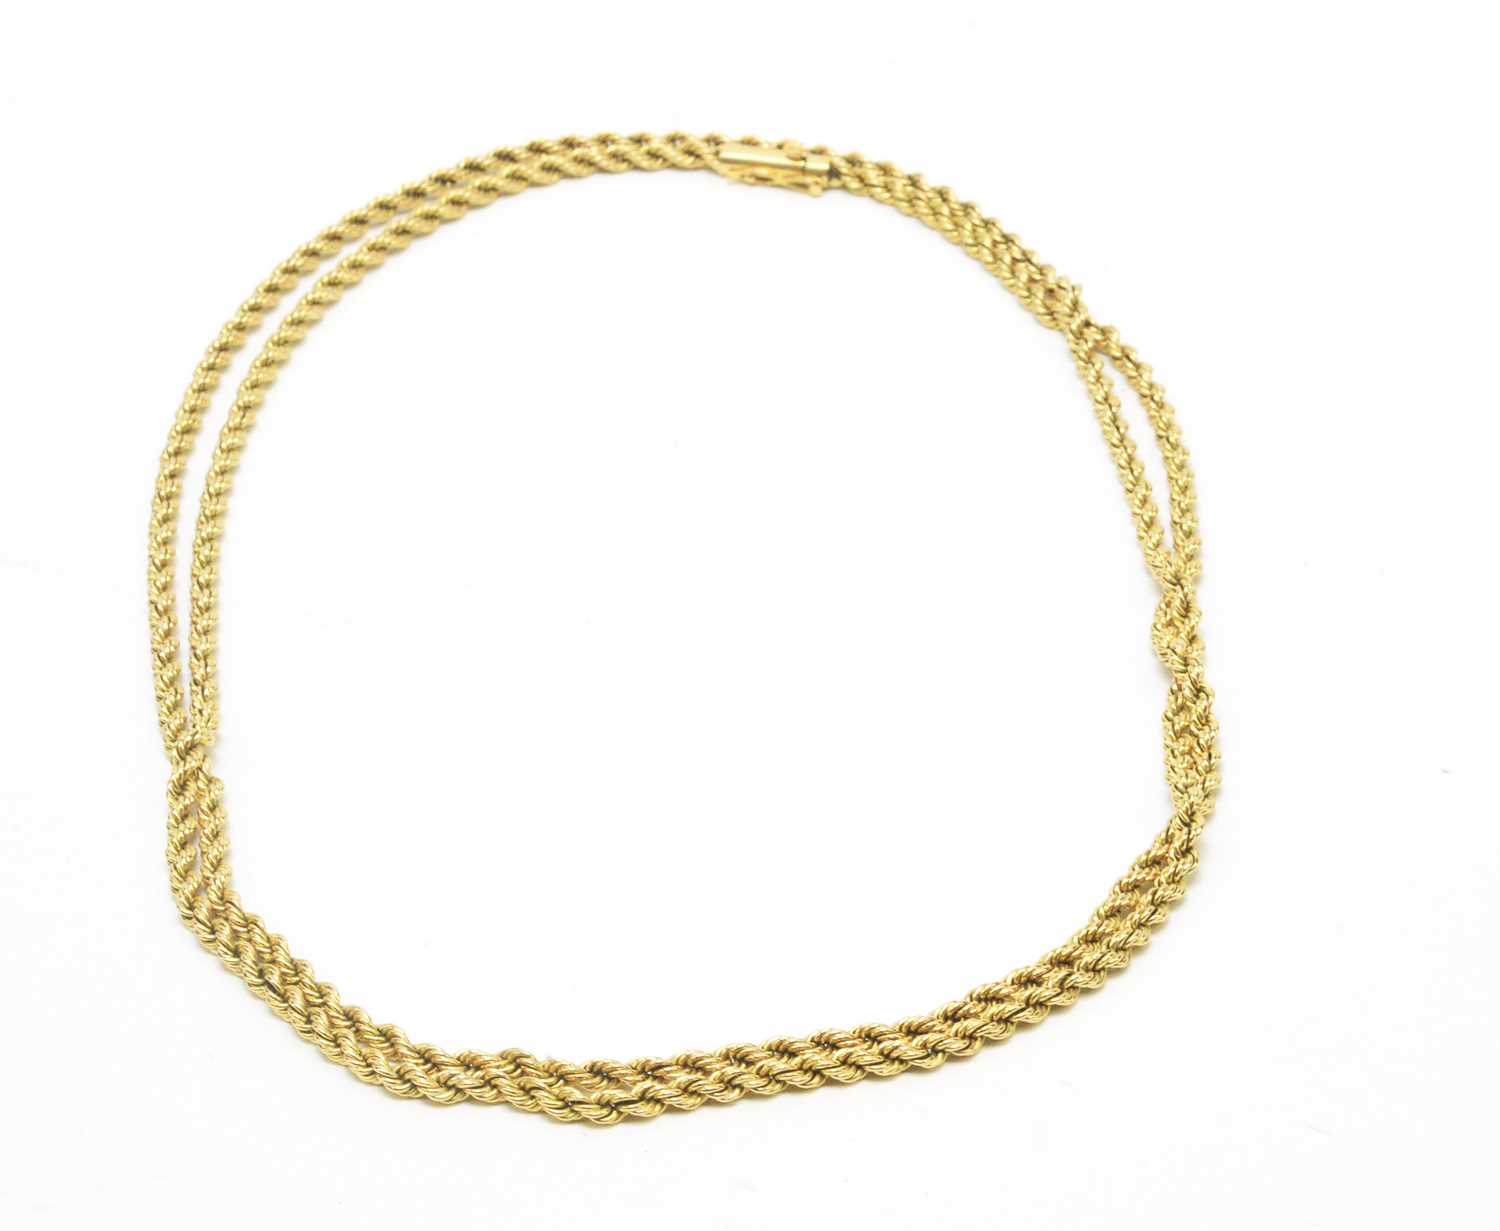 Lot 62 - A fine Egyptian 18ct. yellow gold chain necklace.